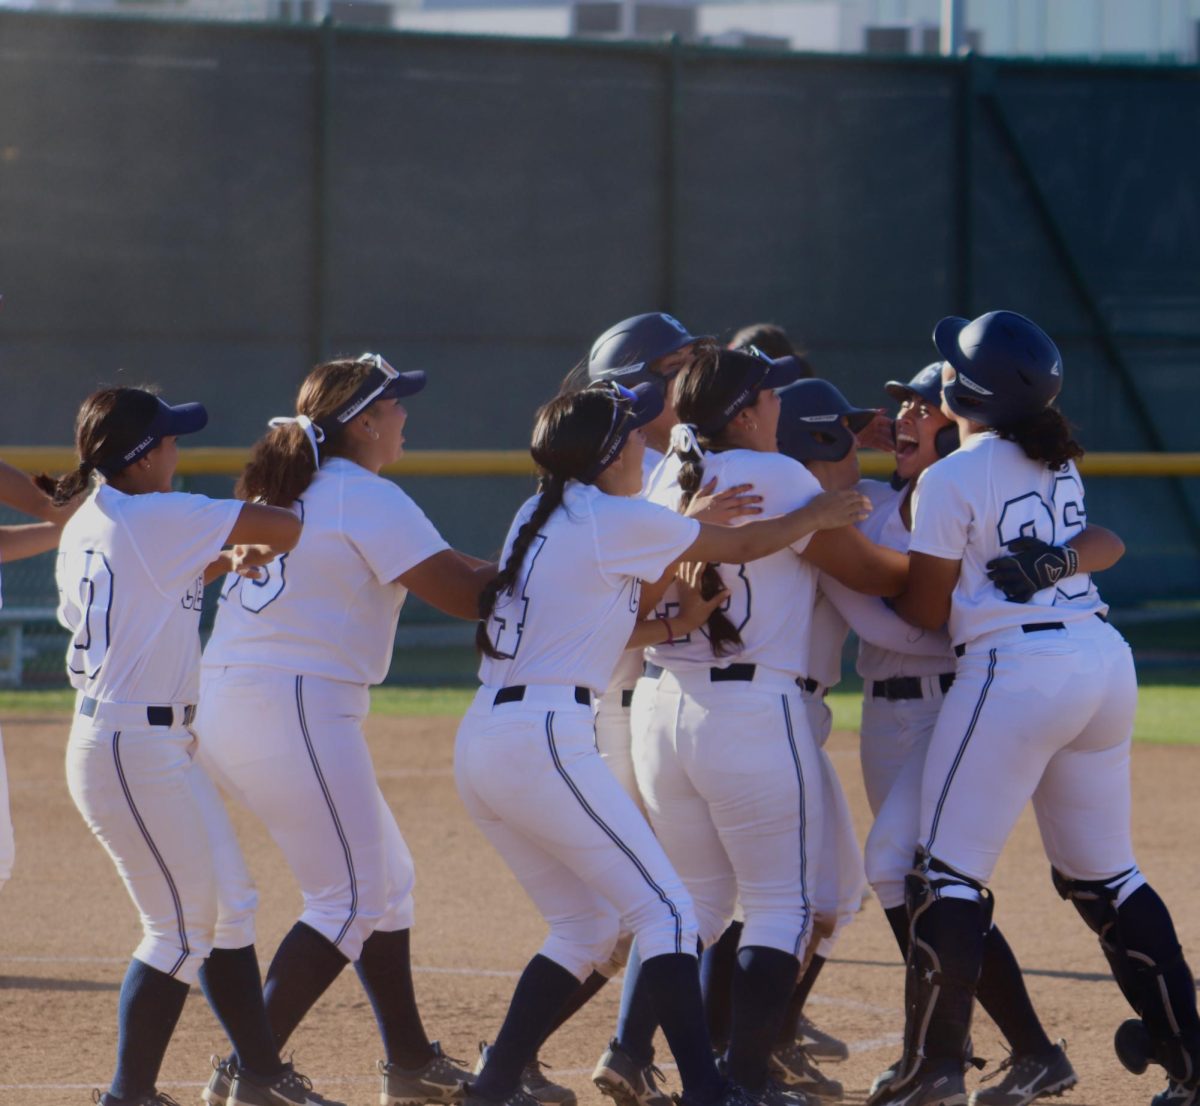 Falcon's players running up to Marley Manalo after she hit a walk-off single to give them the win against Mt. Sac